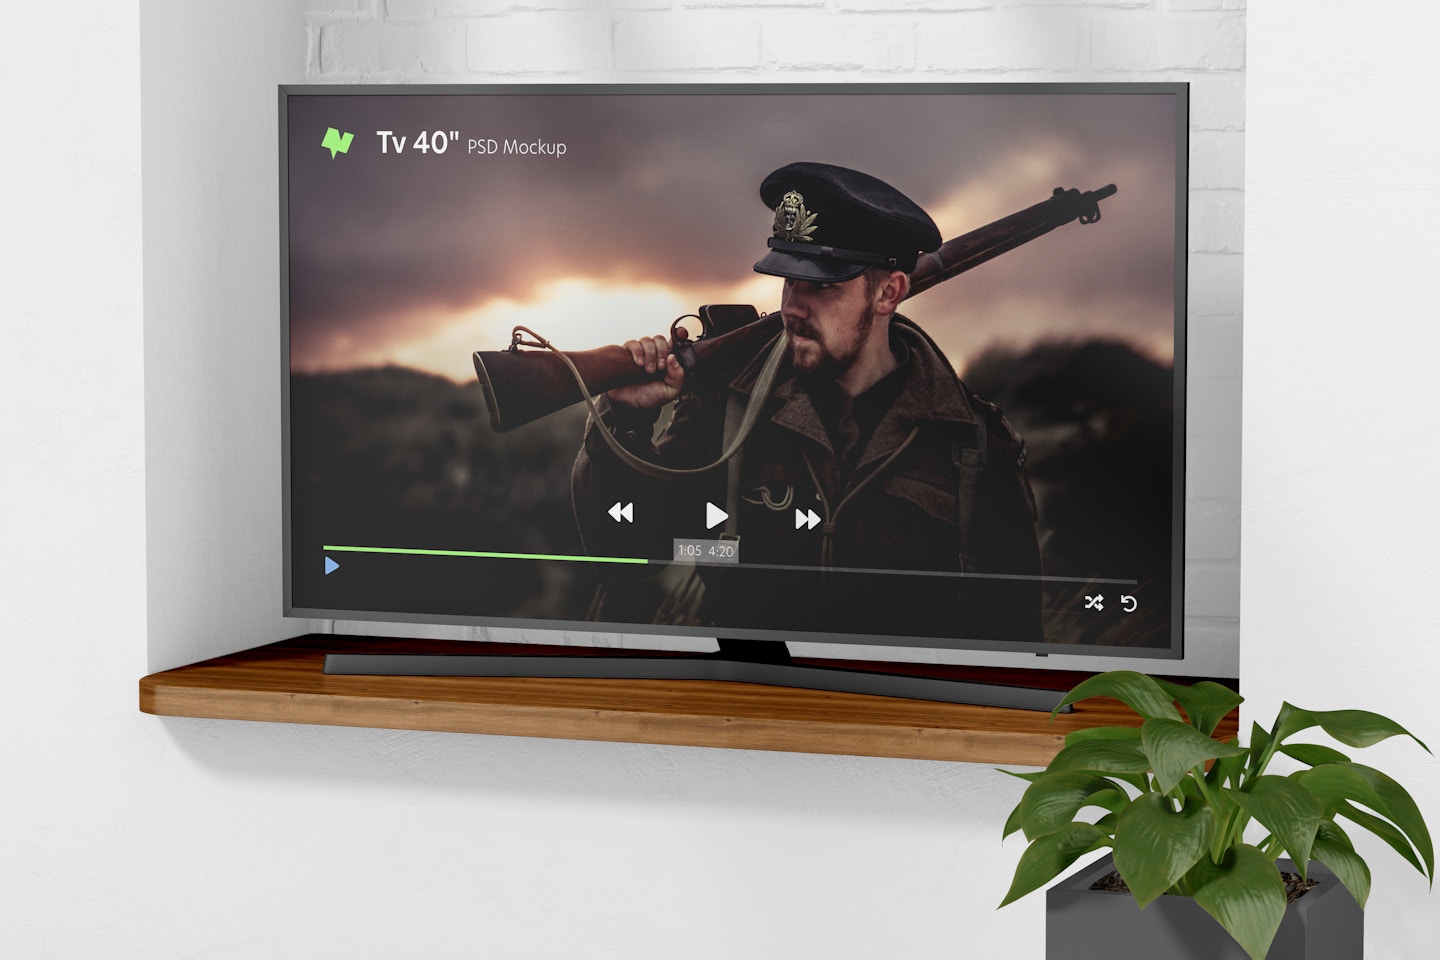 Tv 40" Mockup, Perspective View